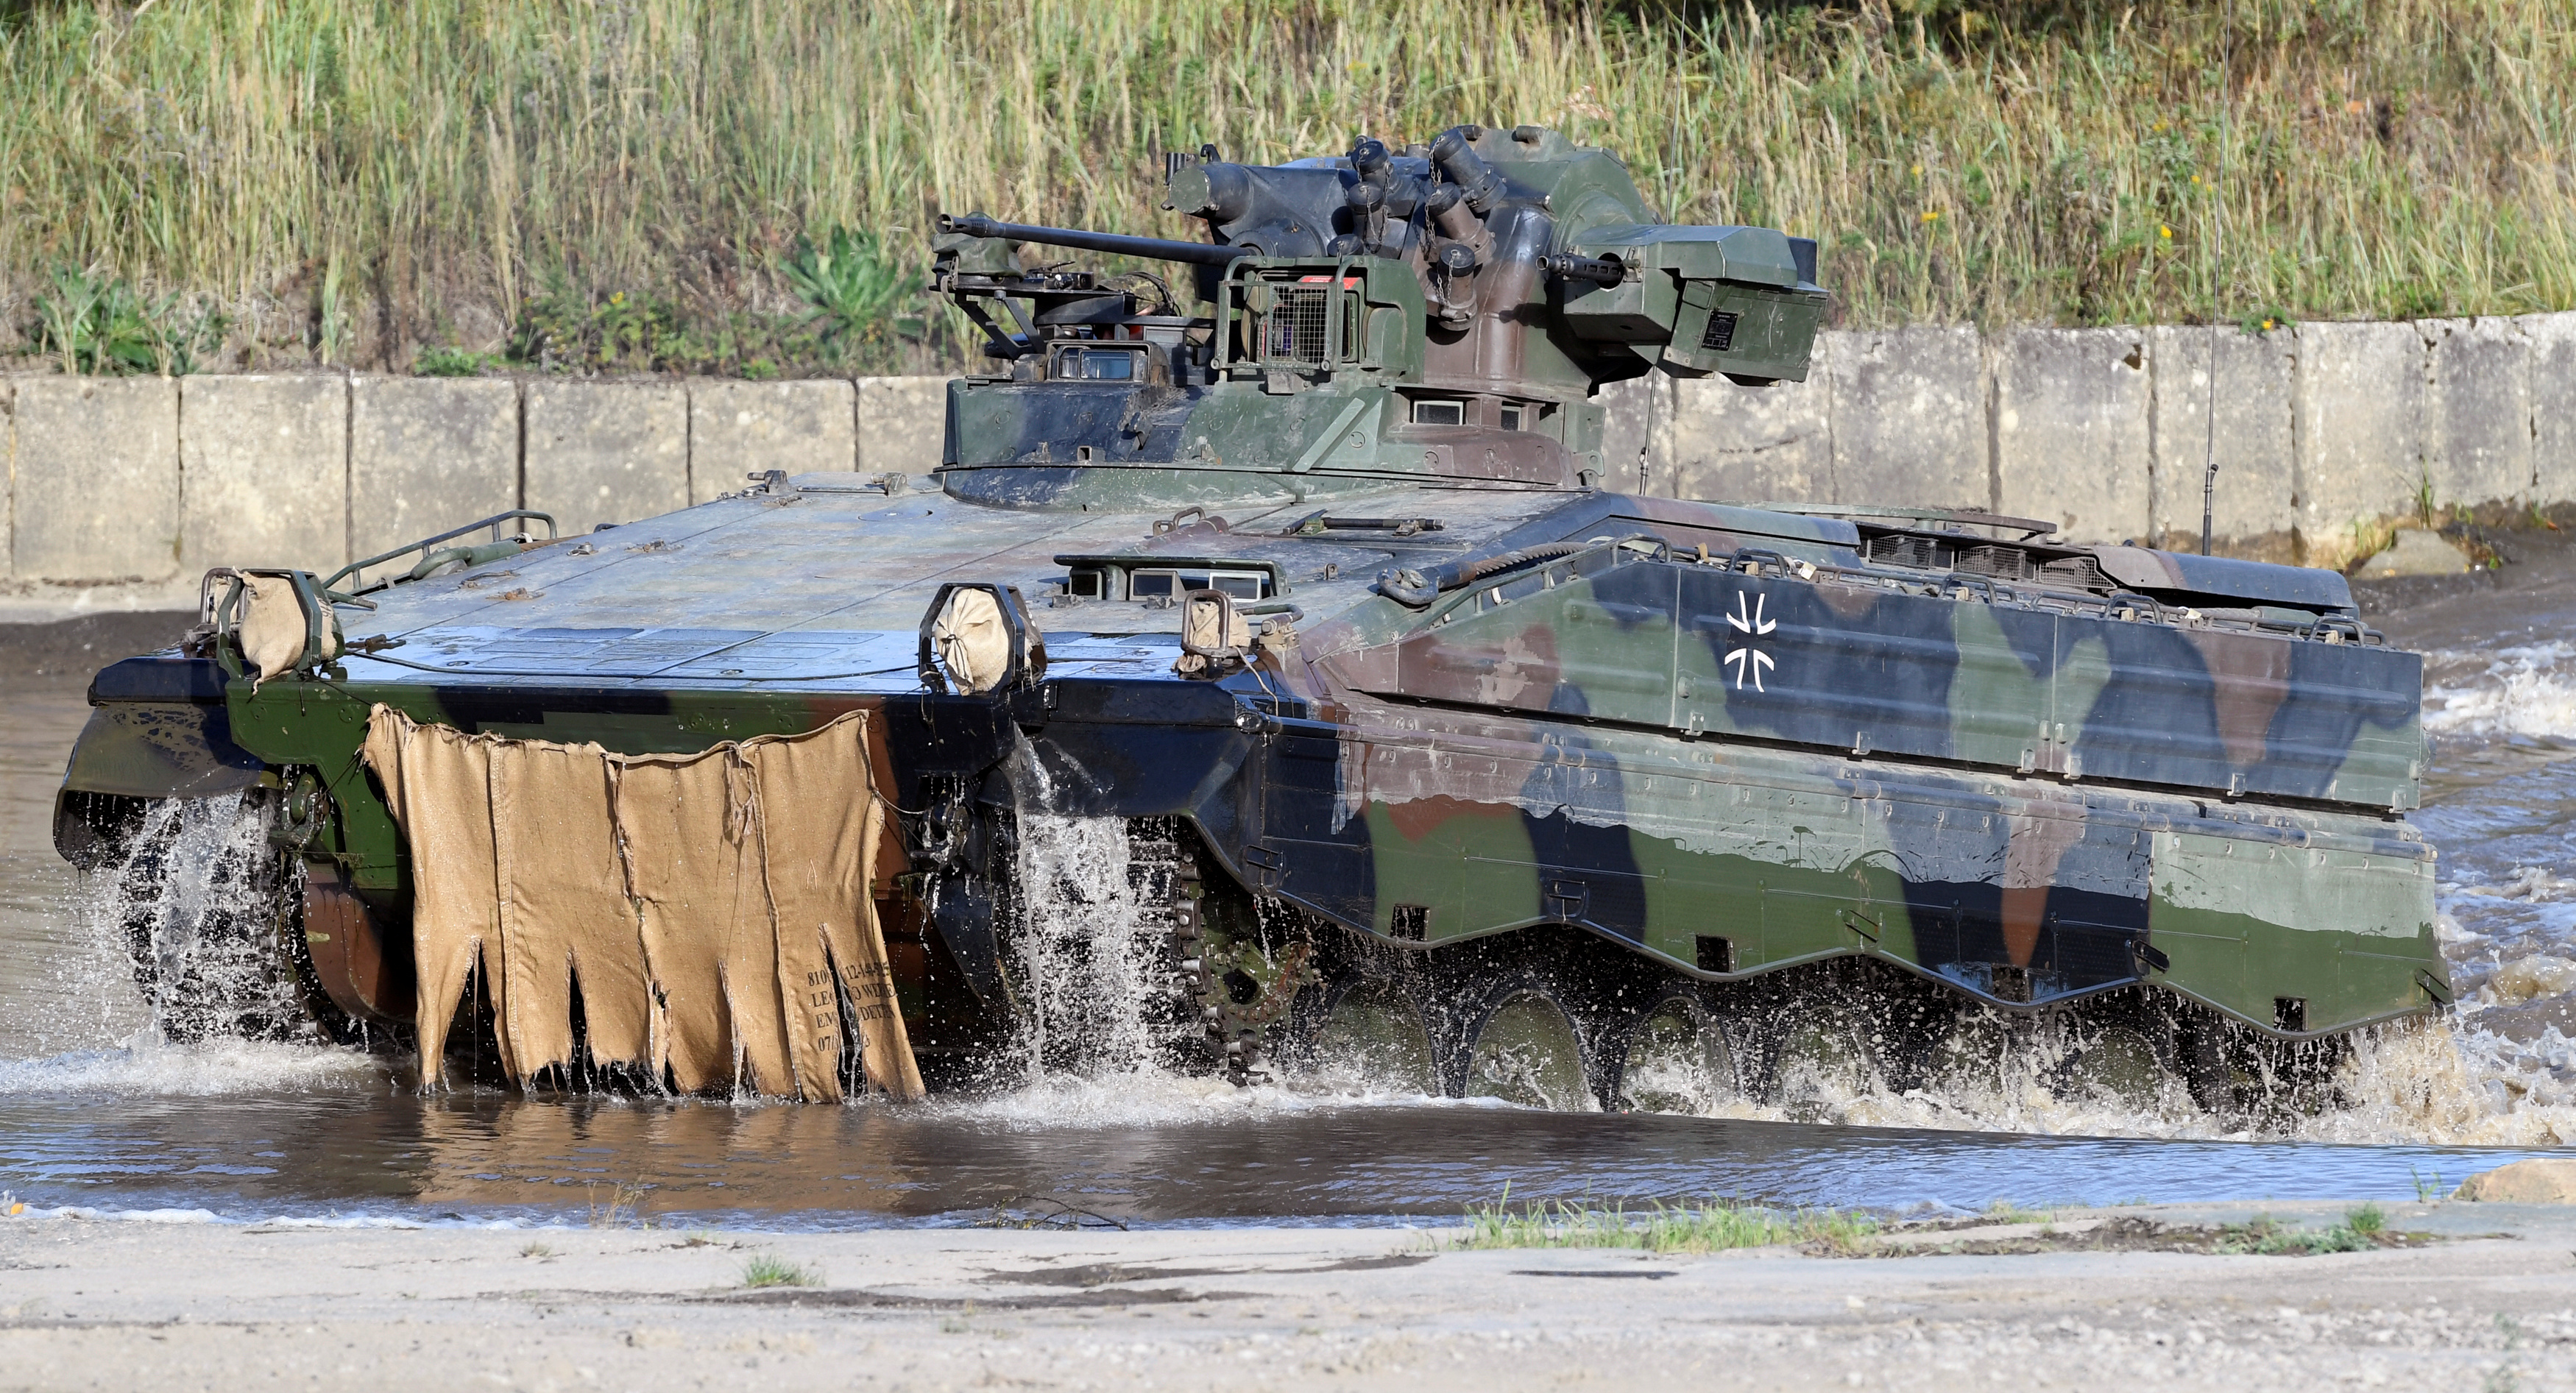 A Marder armoured infantry fighting vehicle of the German army Bundeswehr takes part in an exercise during a media day in Munster